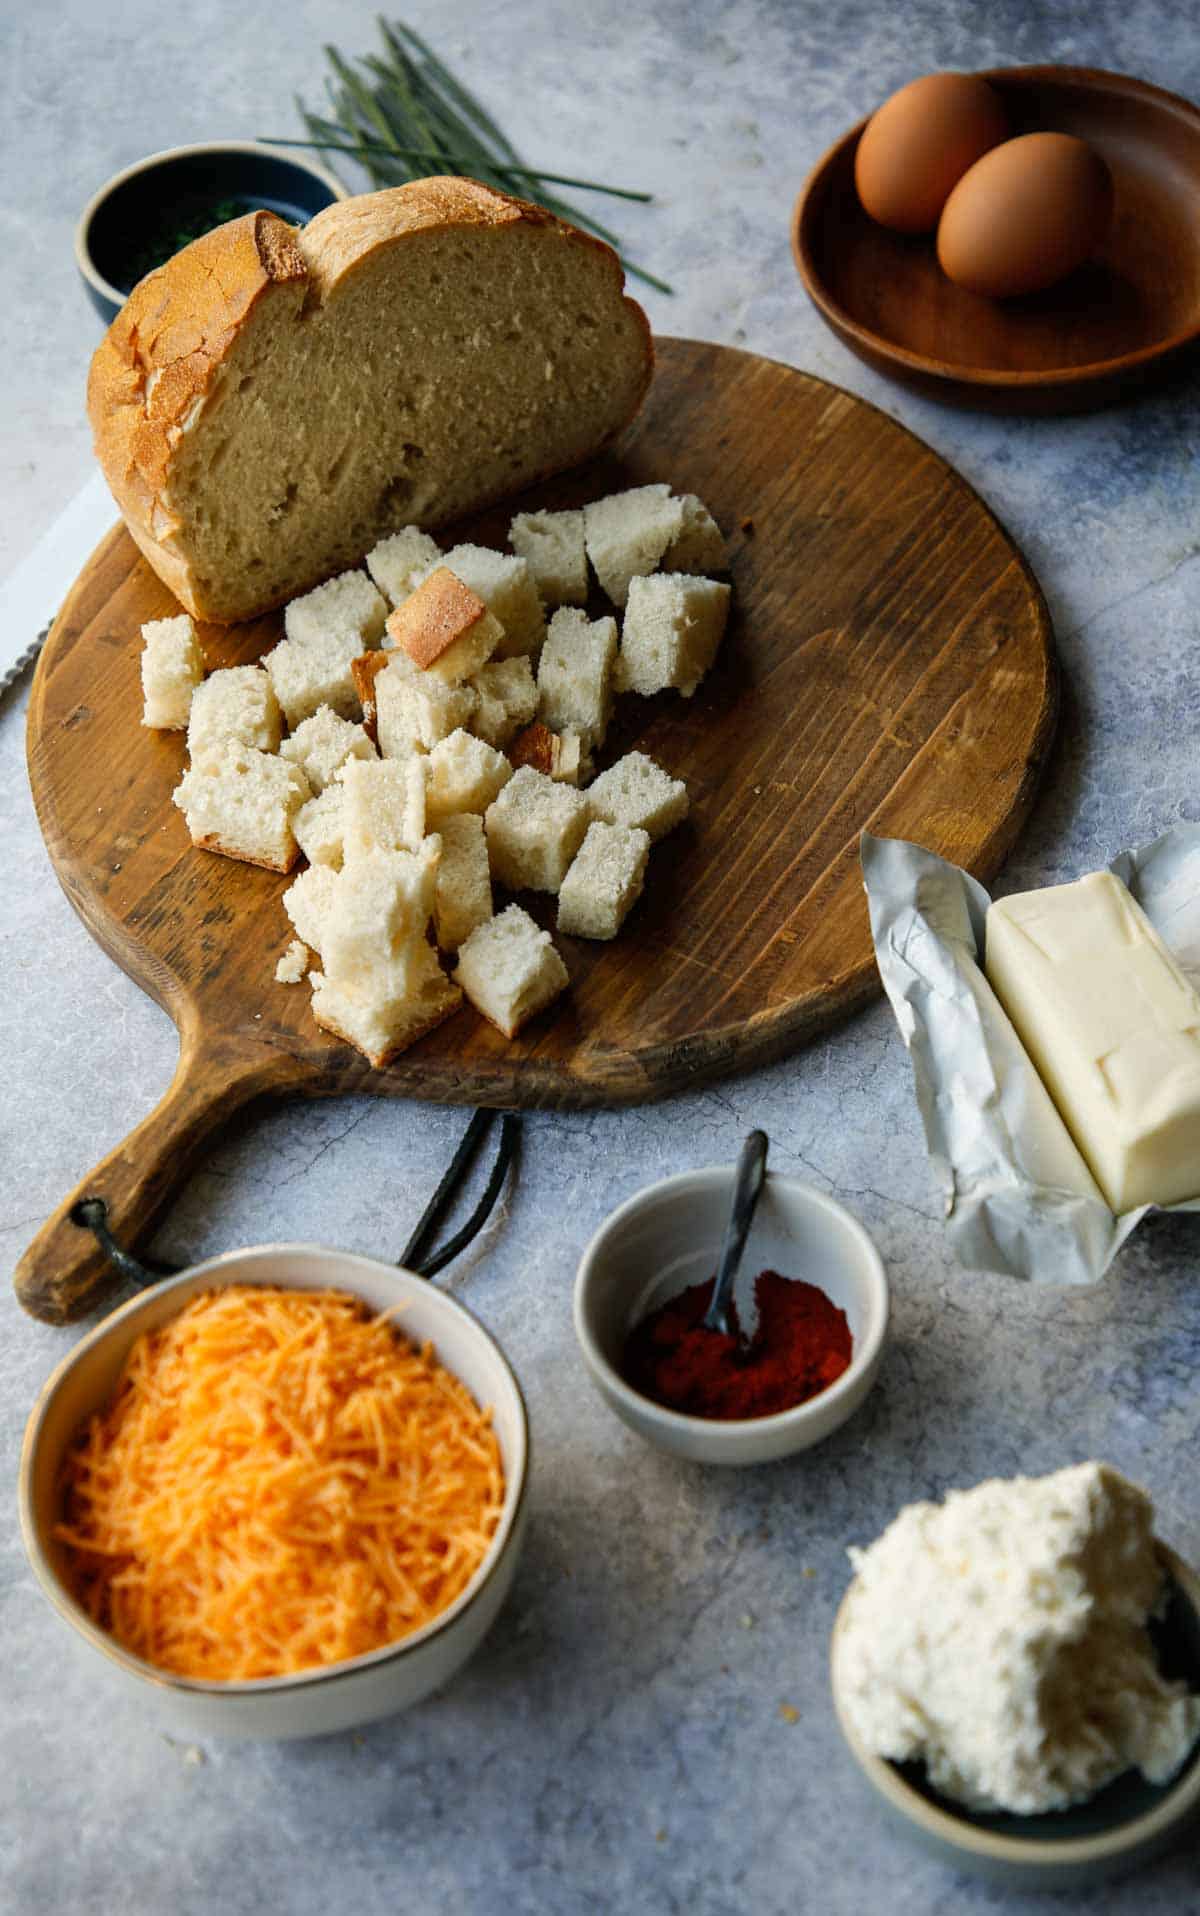 Ingredients laid out on a counter such as bread, cheddar cheese, cream cheese, and eggs